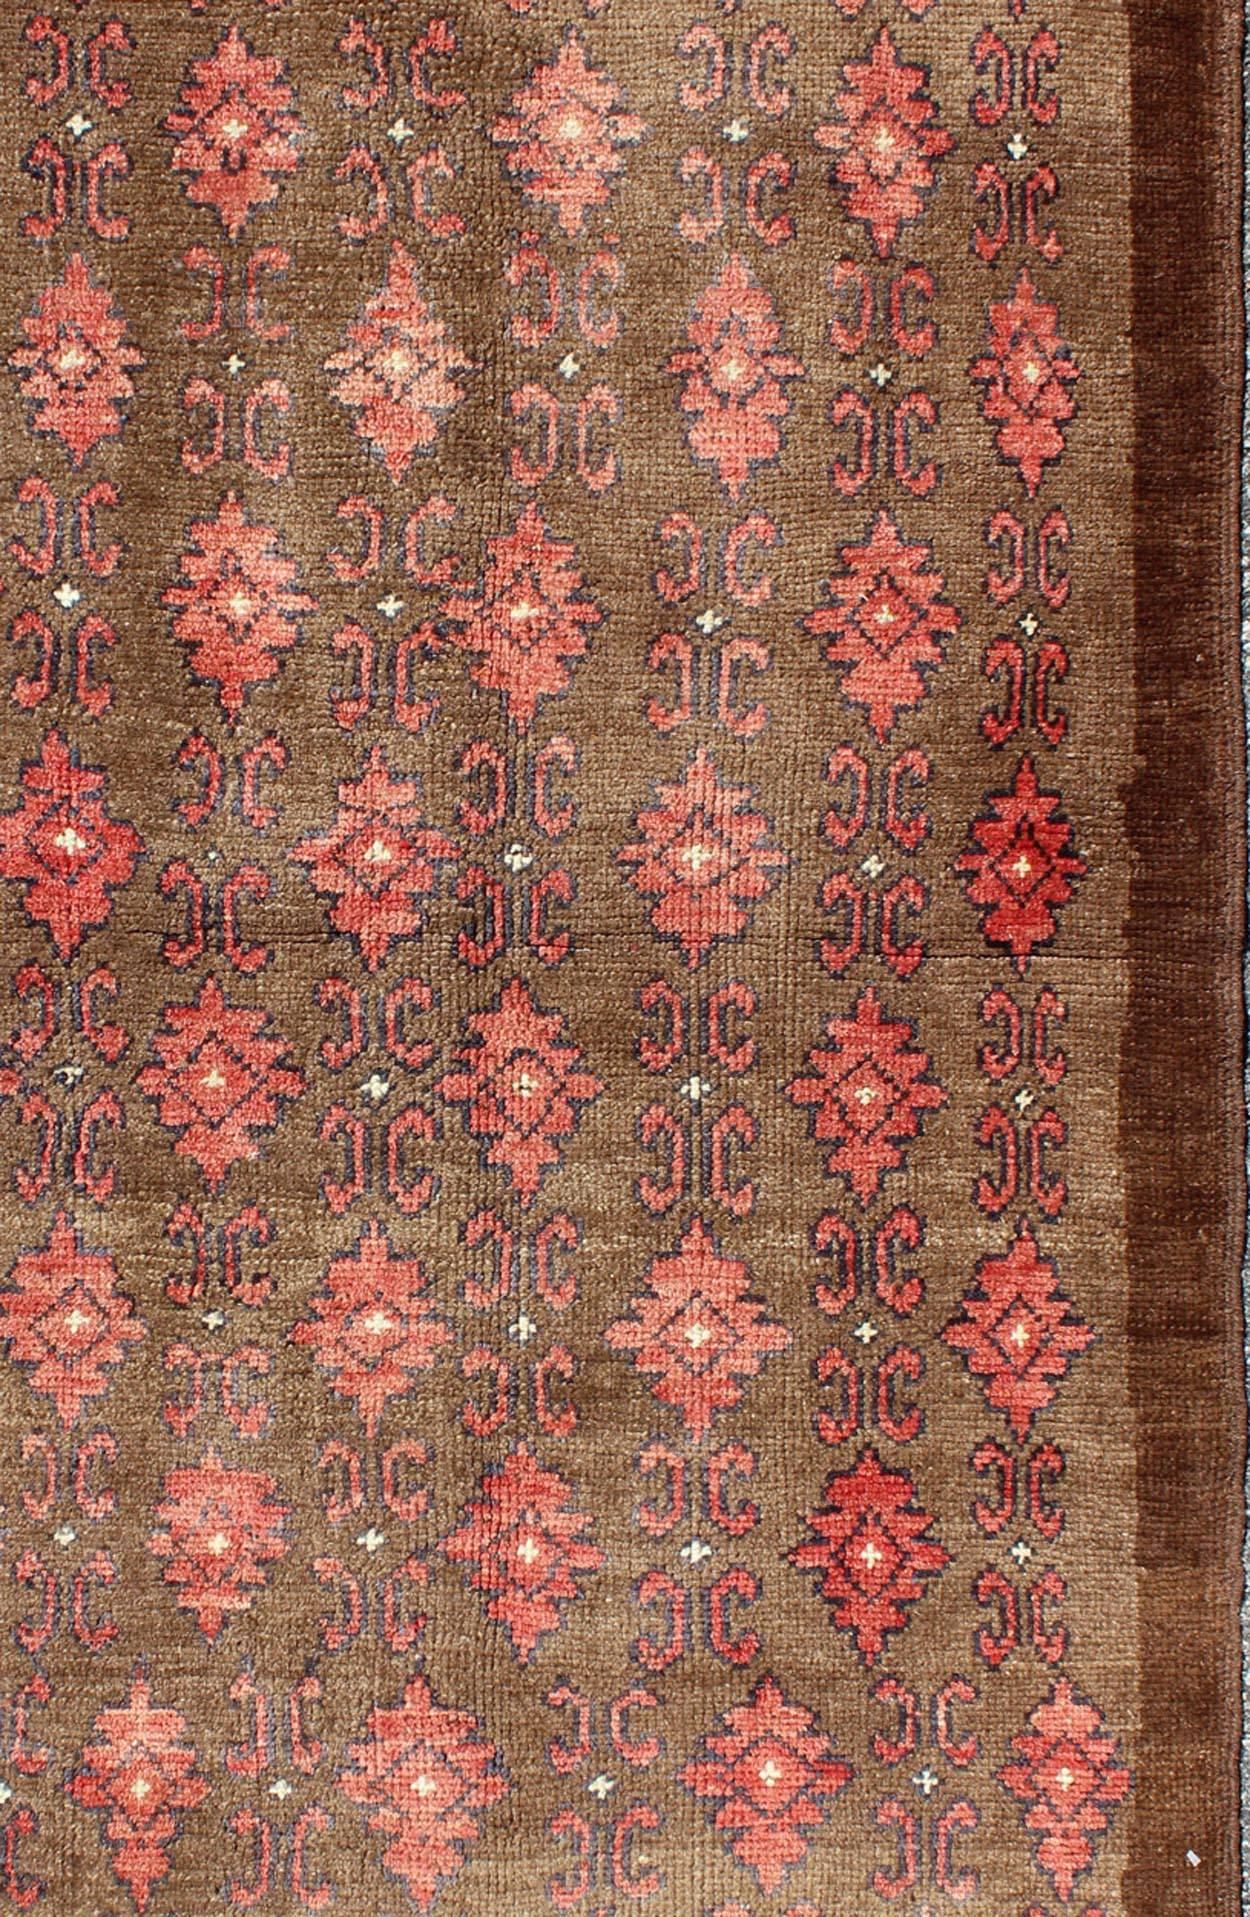 Red and Brown Vintage Turkish Oushak Rug with Repeating Vertical Motif Design In Excellent Condition For Sale In Atlanta, GA